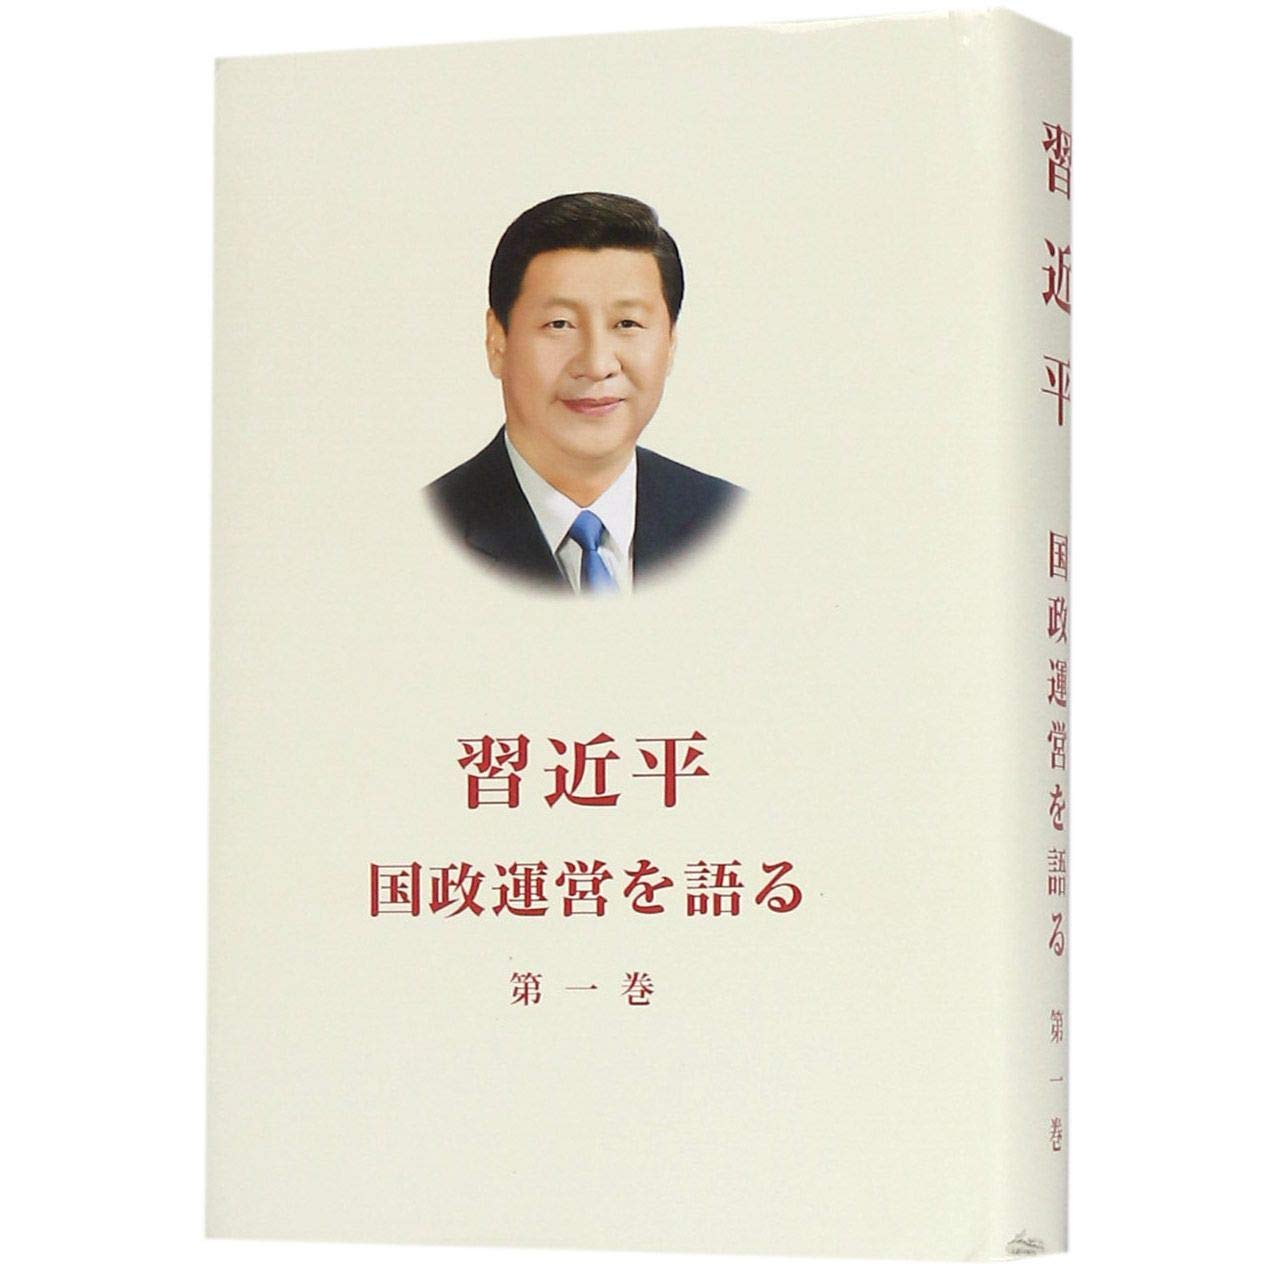 Xi Jinping: The Governance of China Vol. 1 (Japanese) - Hardcover